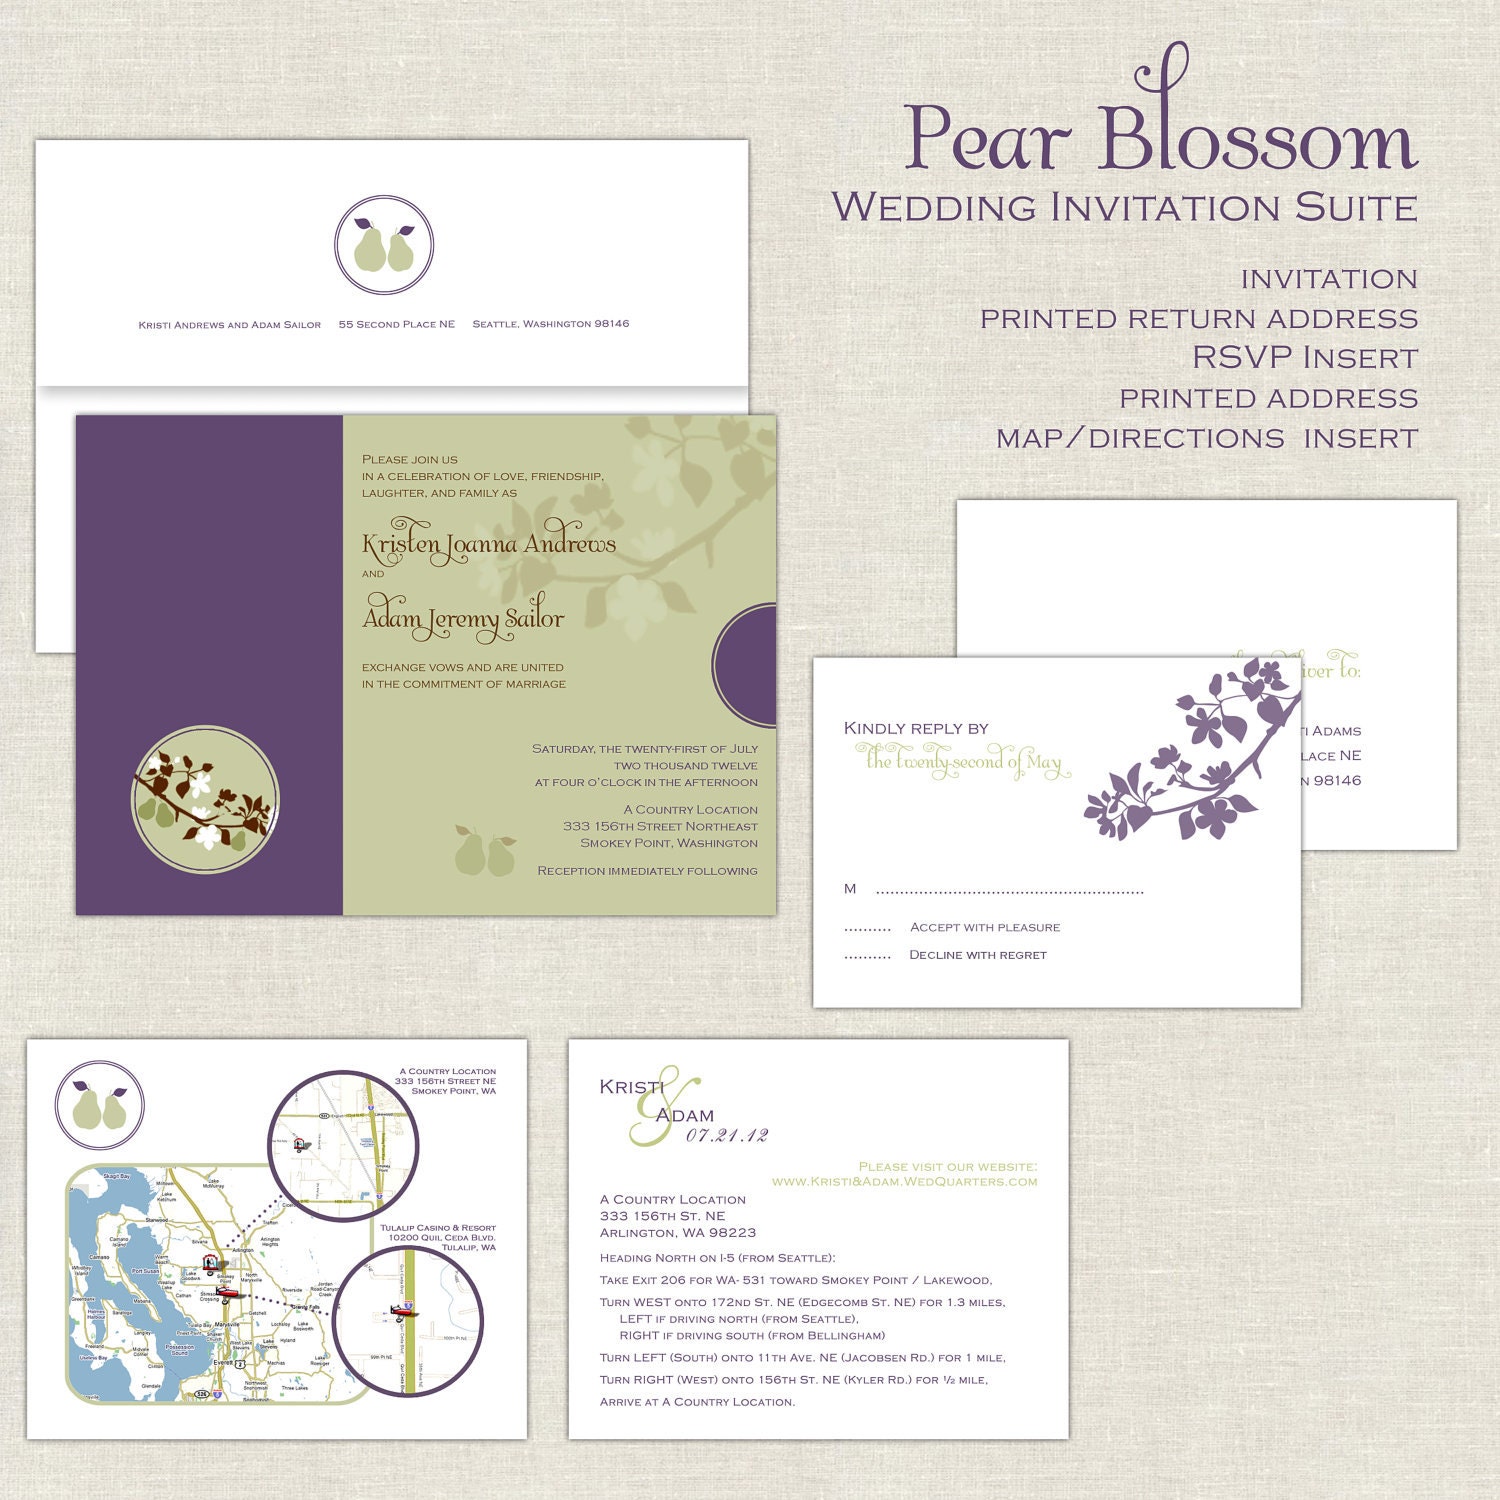 Wedding Invitation Pear Blossom Suite in Eggplant Purple and Sage Green